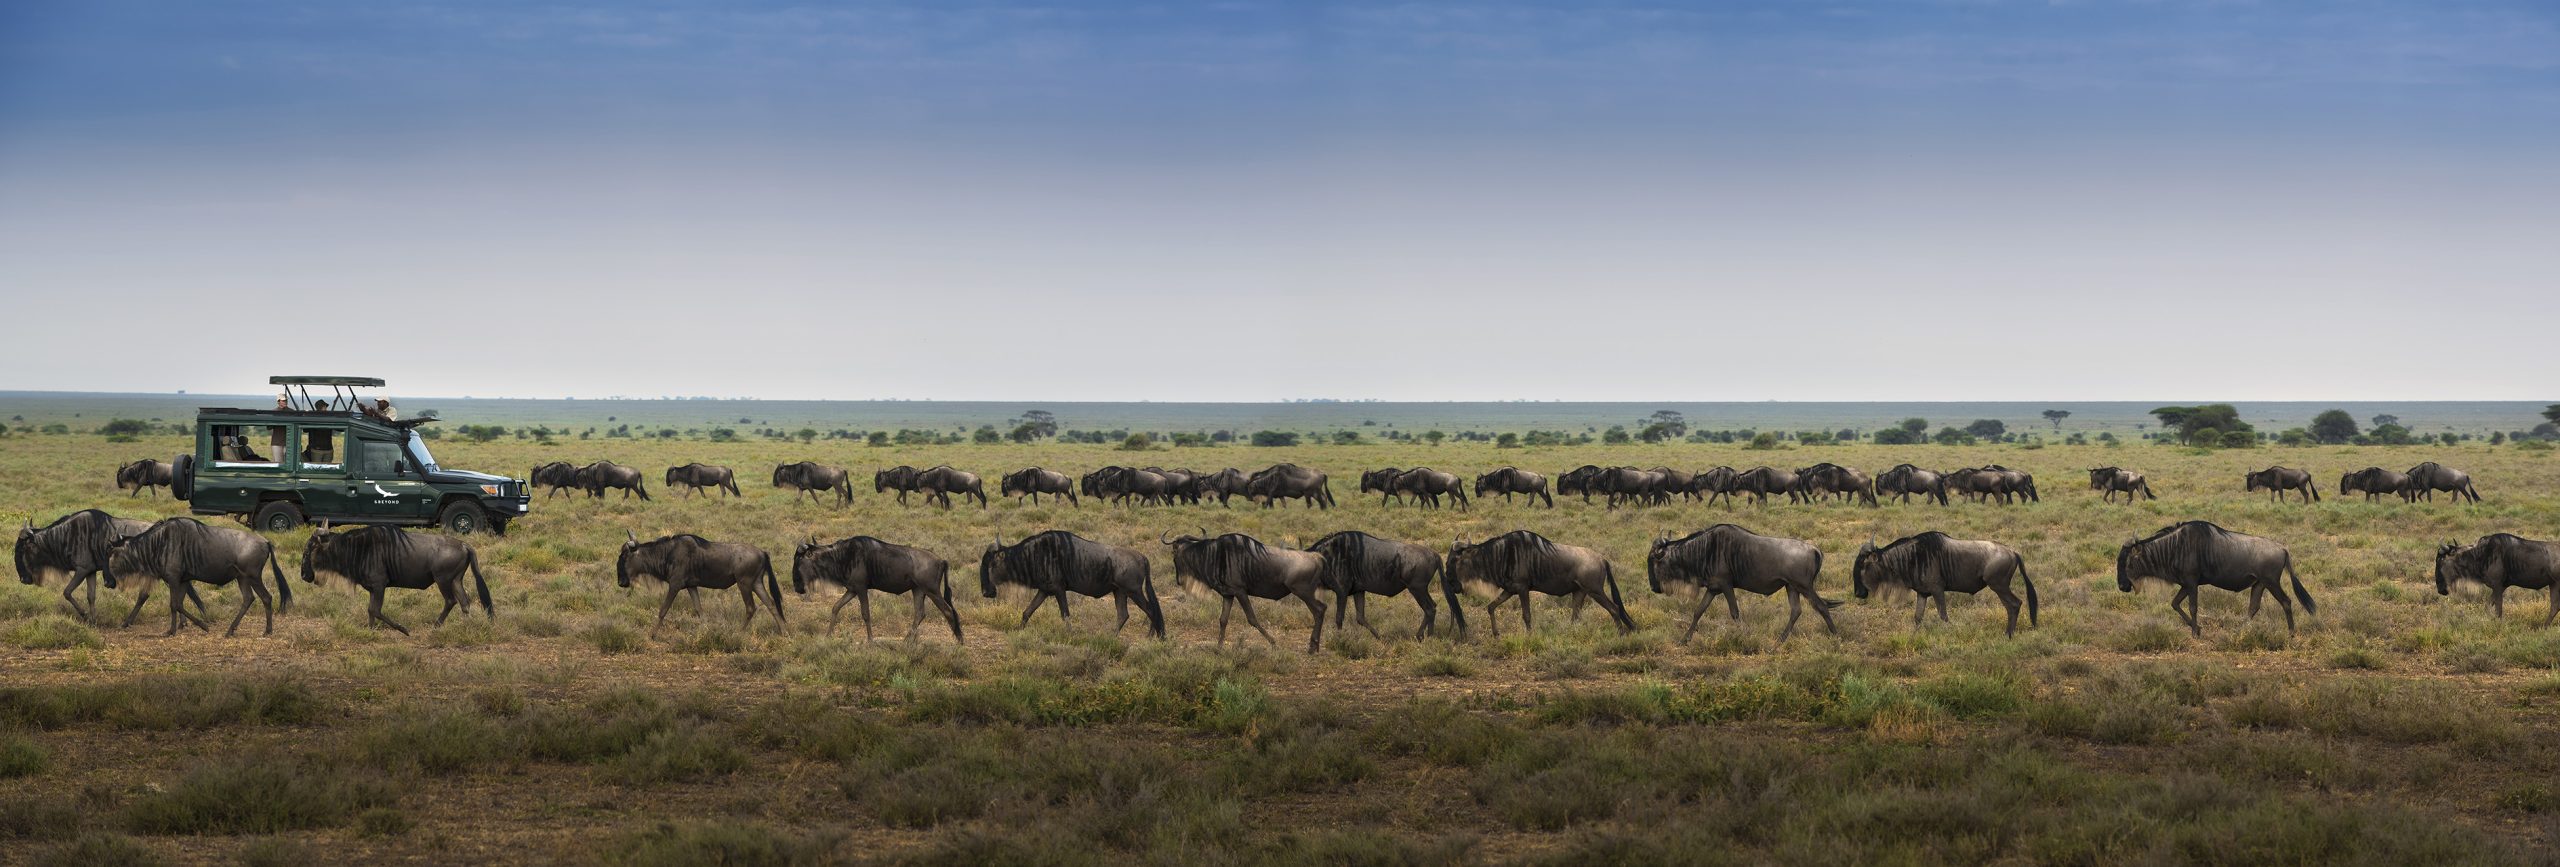 A game drive safari group passing through part of the Great Wildebeest Migration